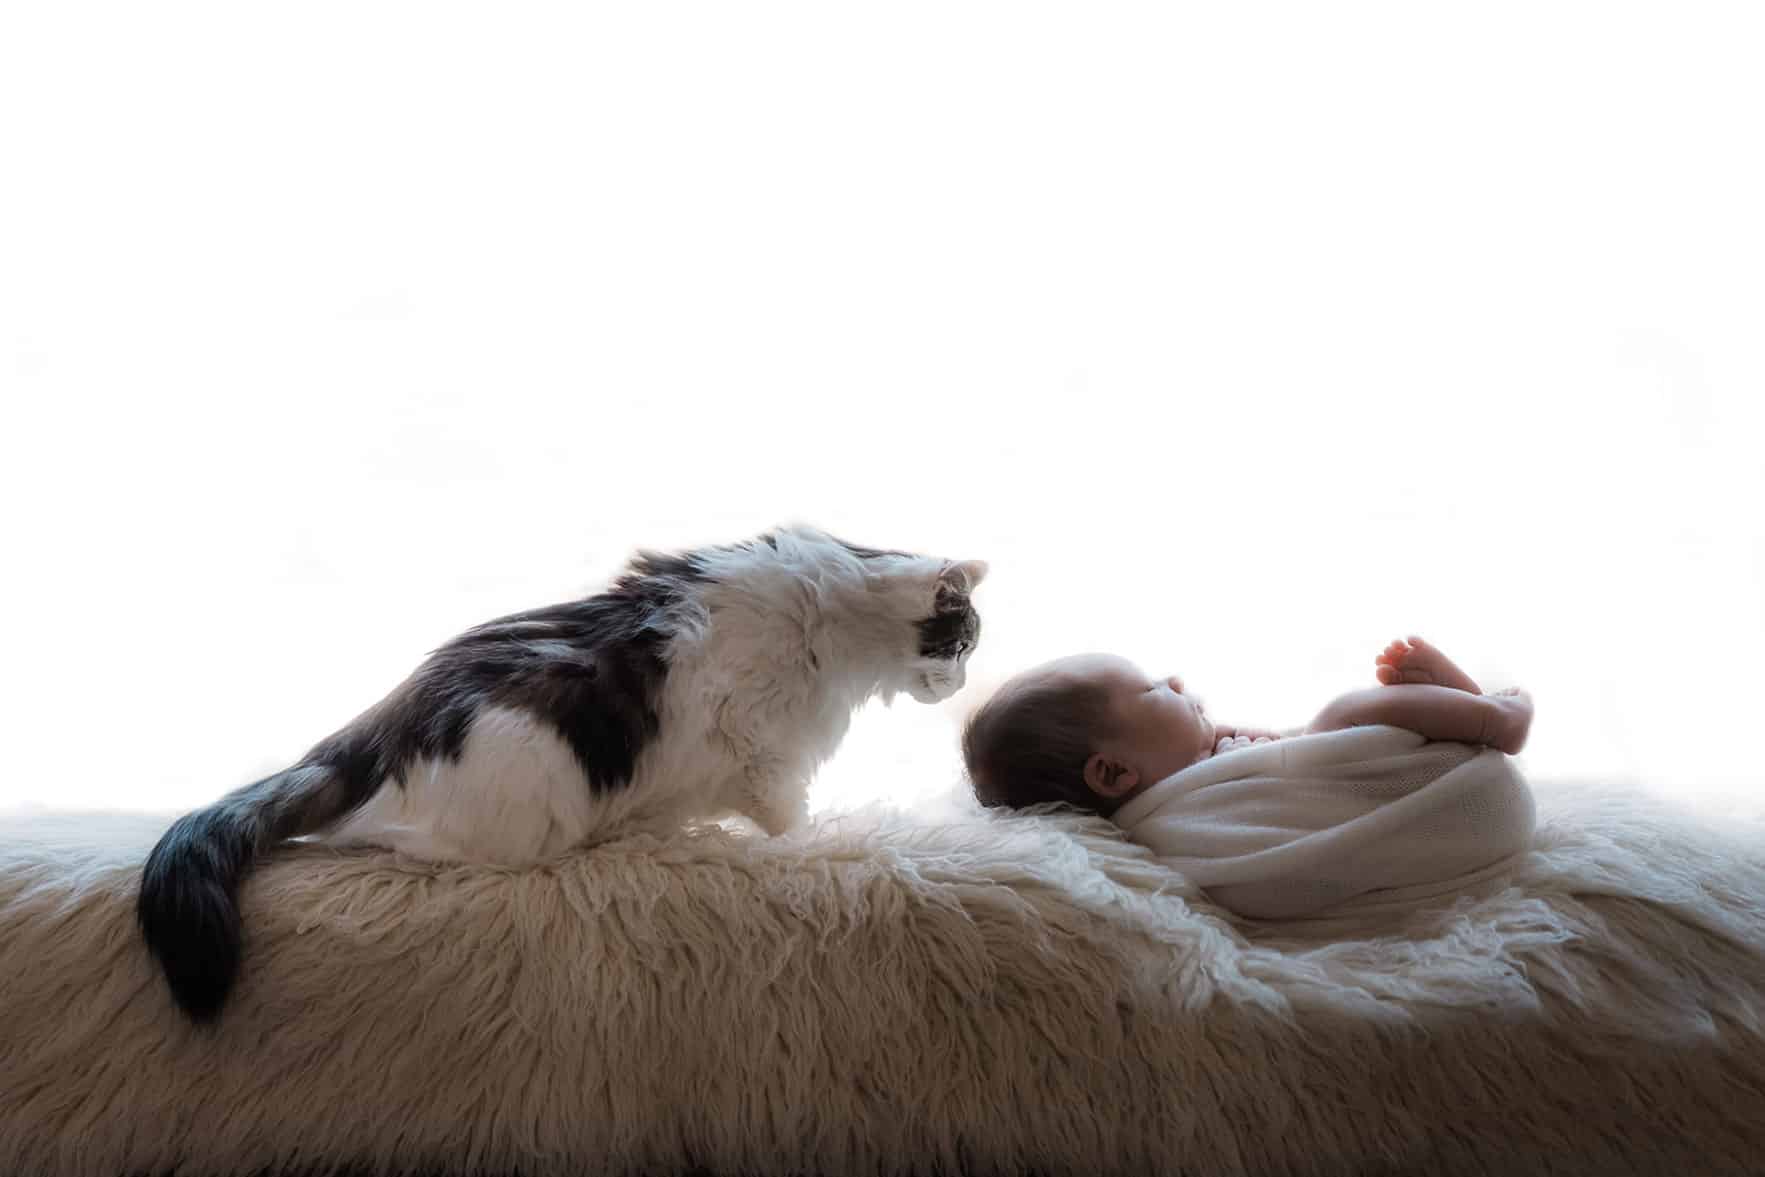 newborn-baby-and-cat-photos-at-home-002 27